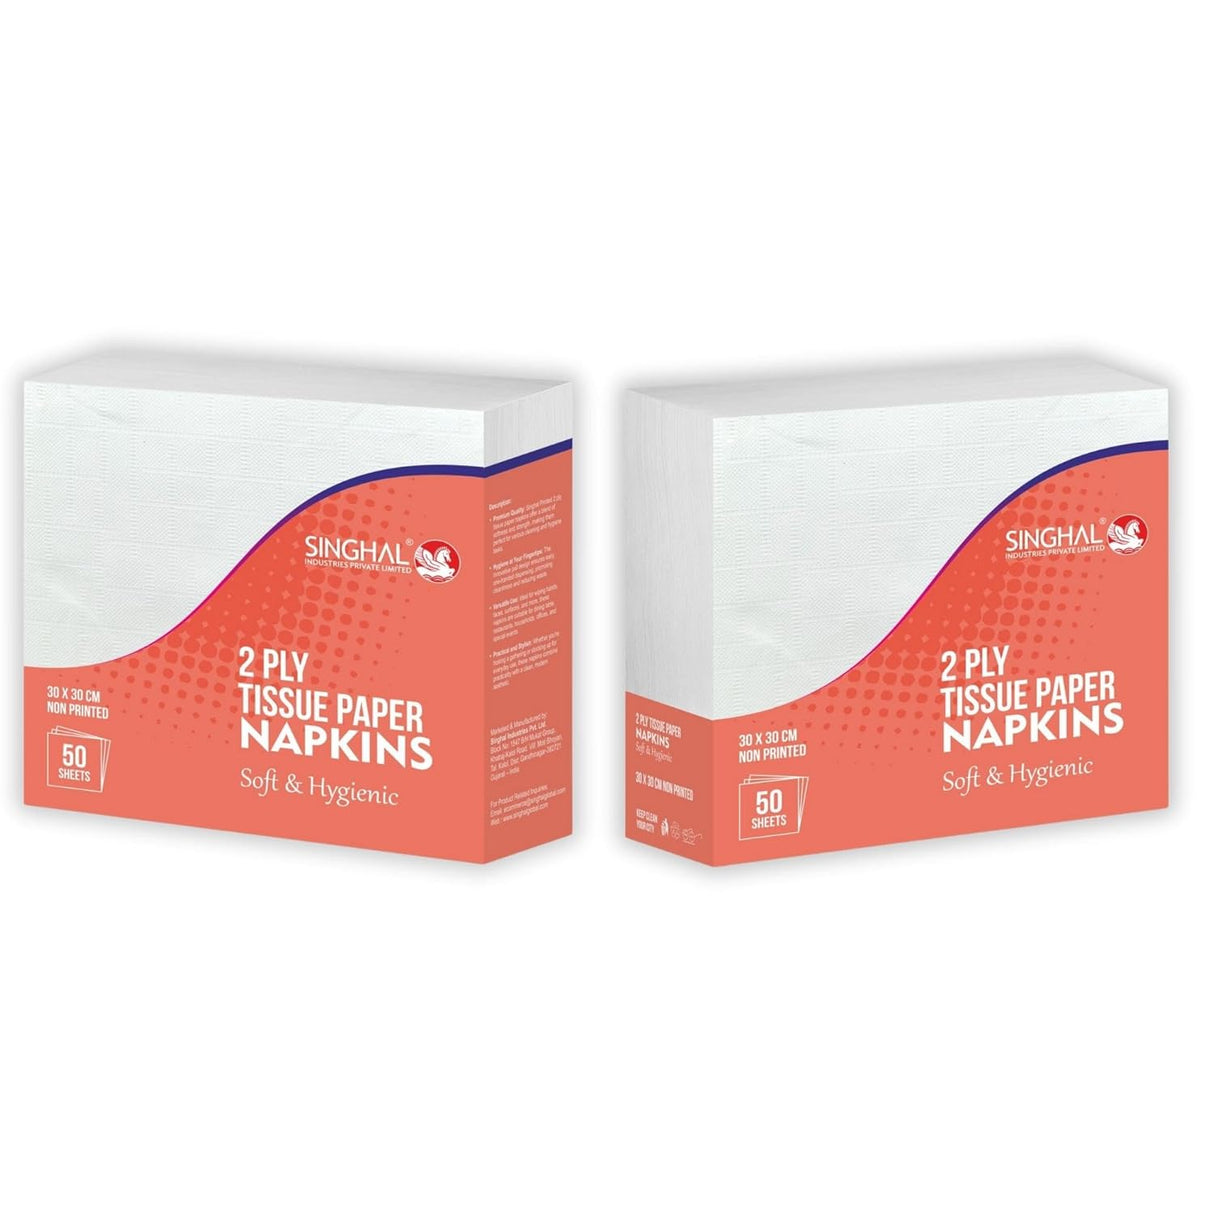 Singhal 2 Ply Tissue Paper Napkins Plain 30x30 CM - Pack of 1 (50 Pulls Per Pack, 50 Sheets)